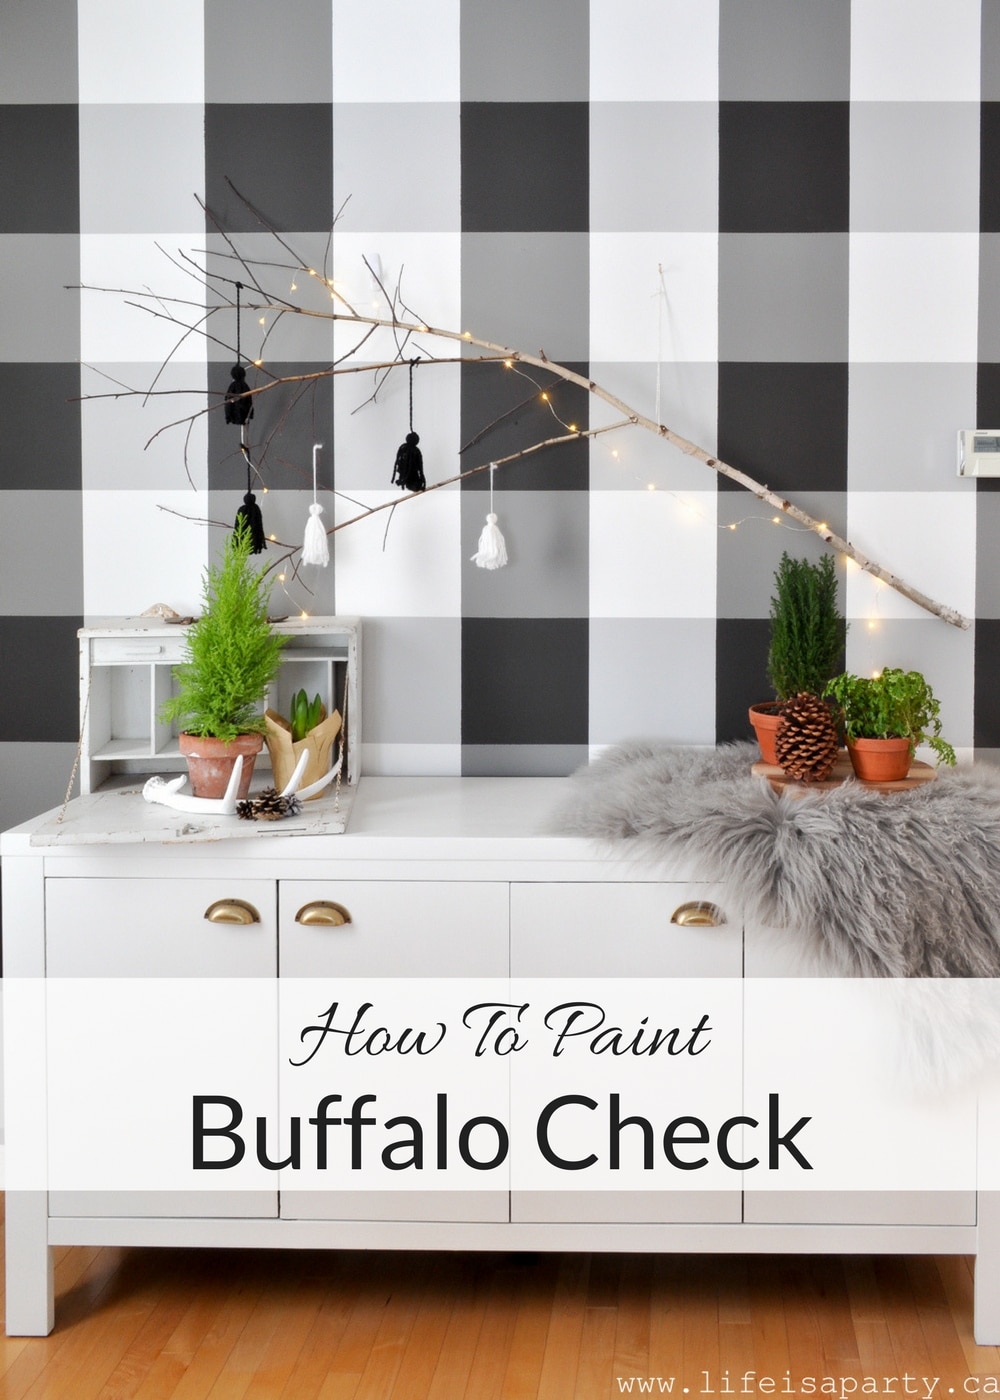 How To Paint a Buffalo Check Feature Wall